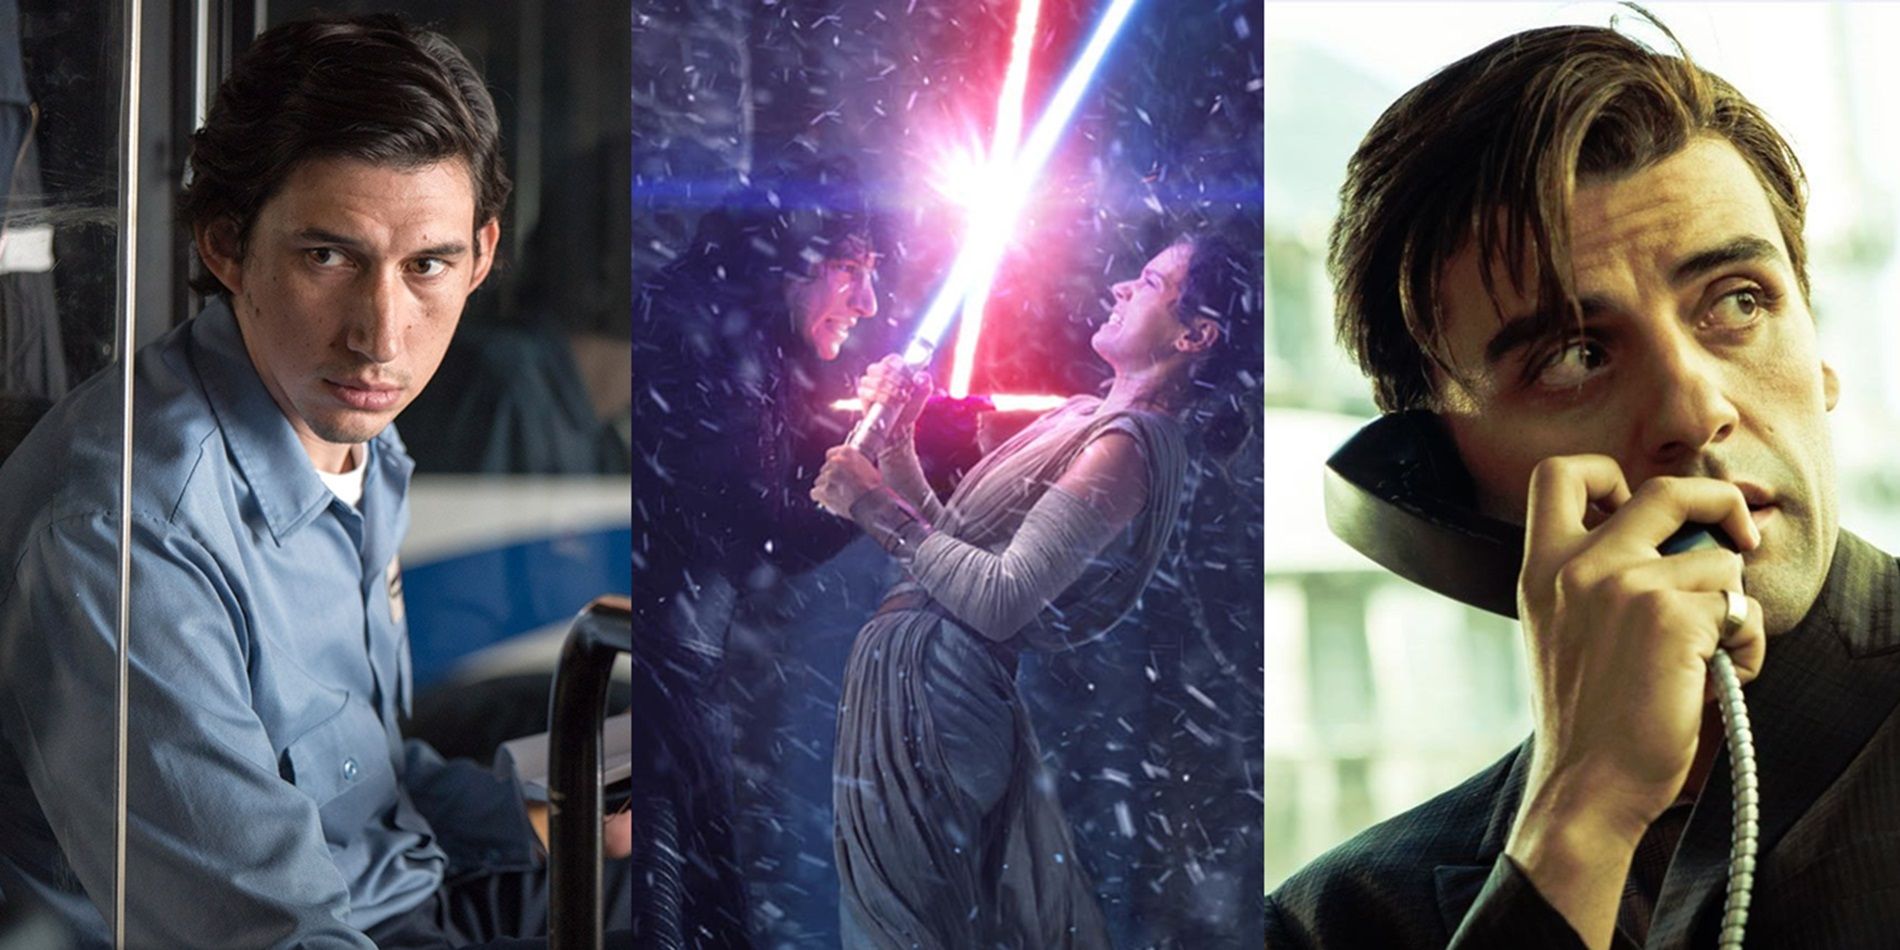 Underrated movies starring Star Wars sequel actors